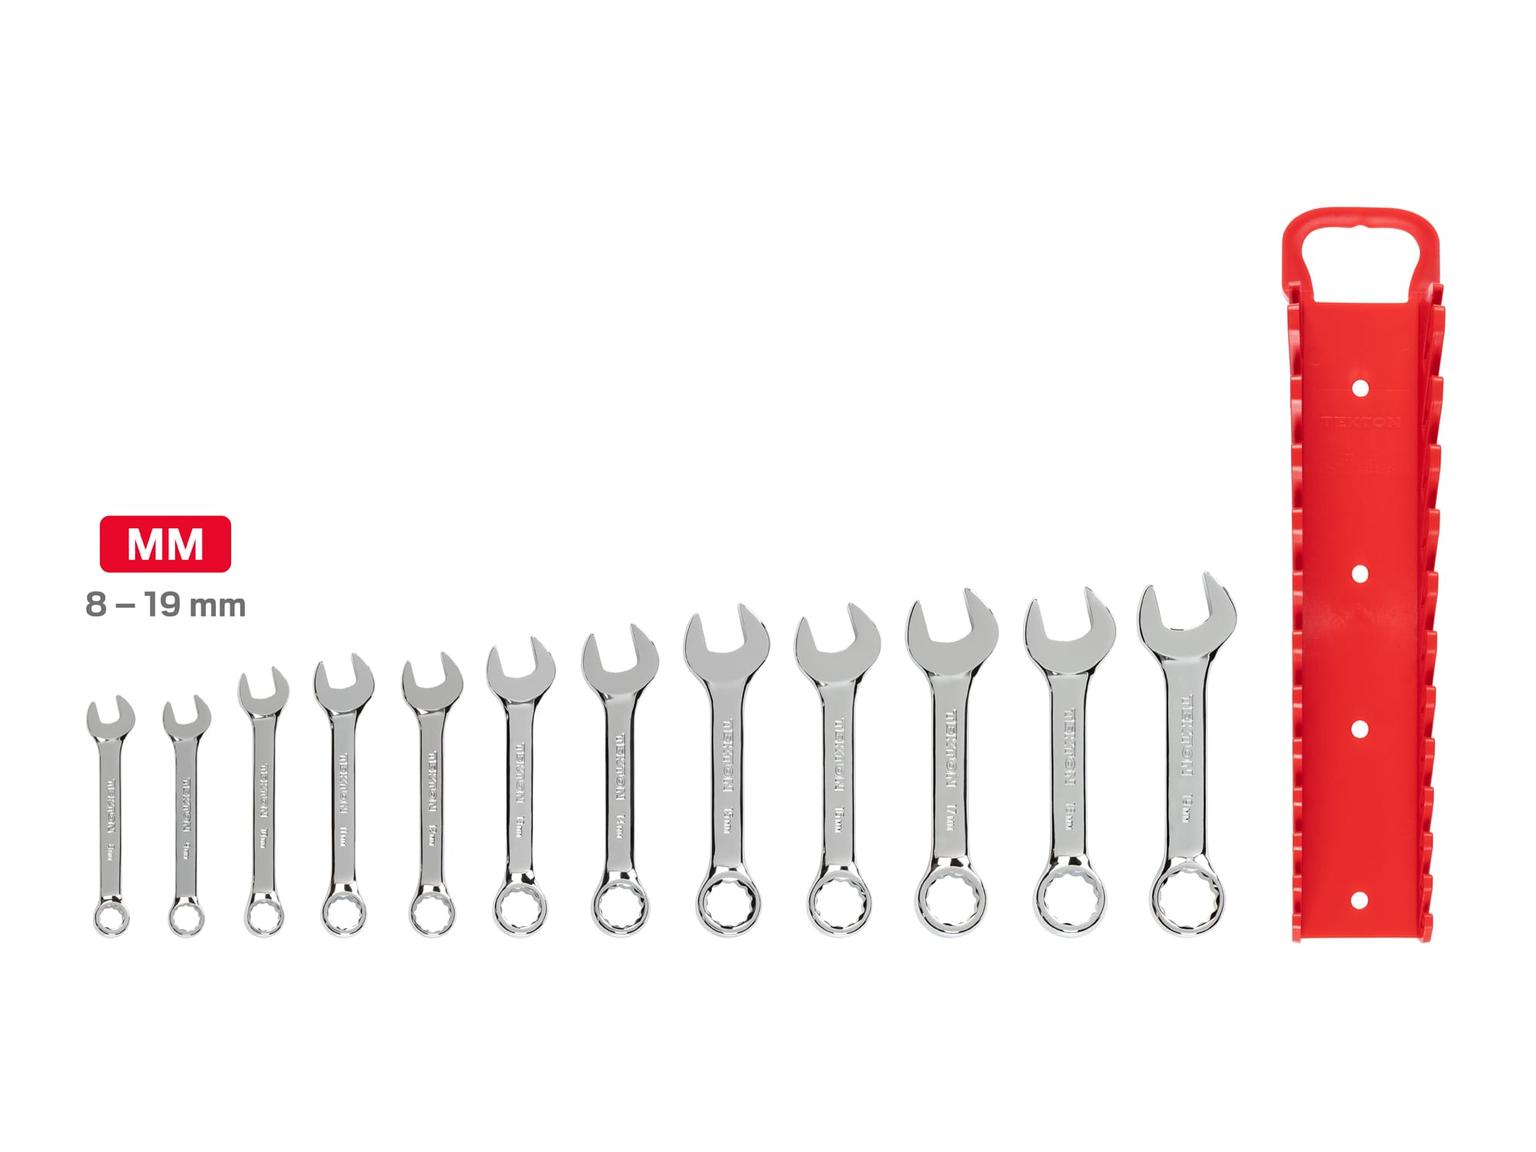 TEKTON WRN01170-T Stubby Combination Wrench Set with Holder, 12-Piece (8 - 19 mm)